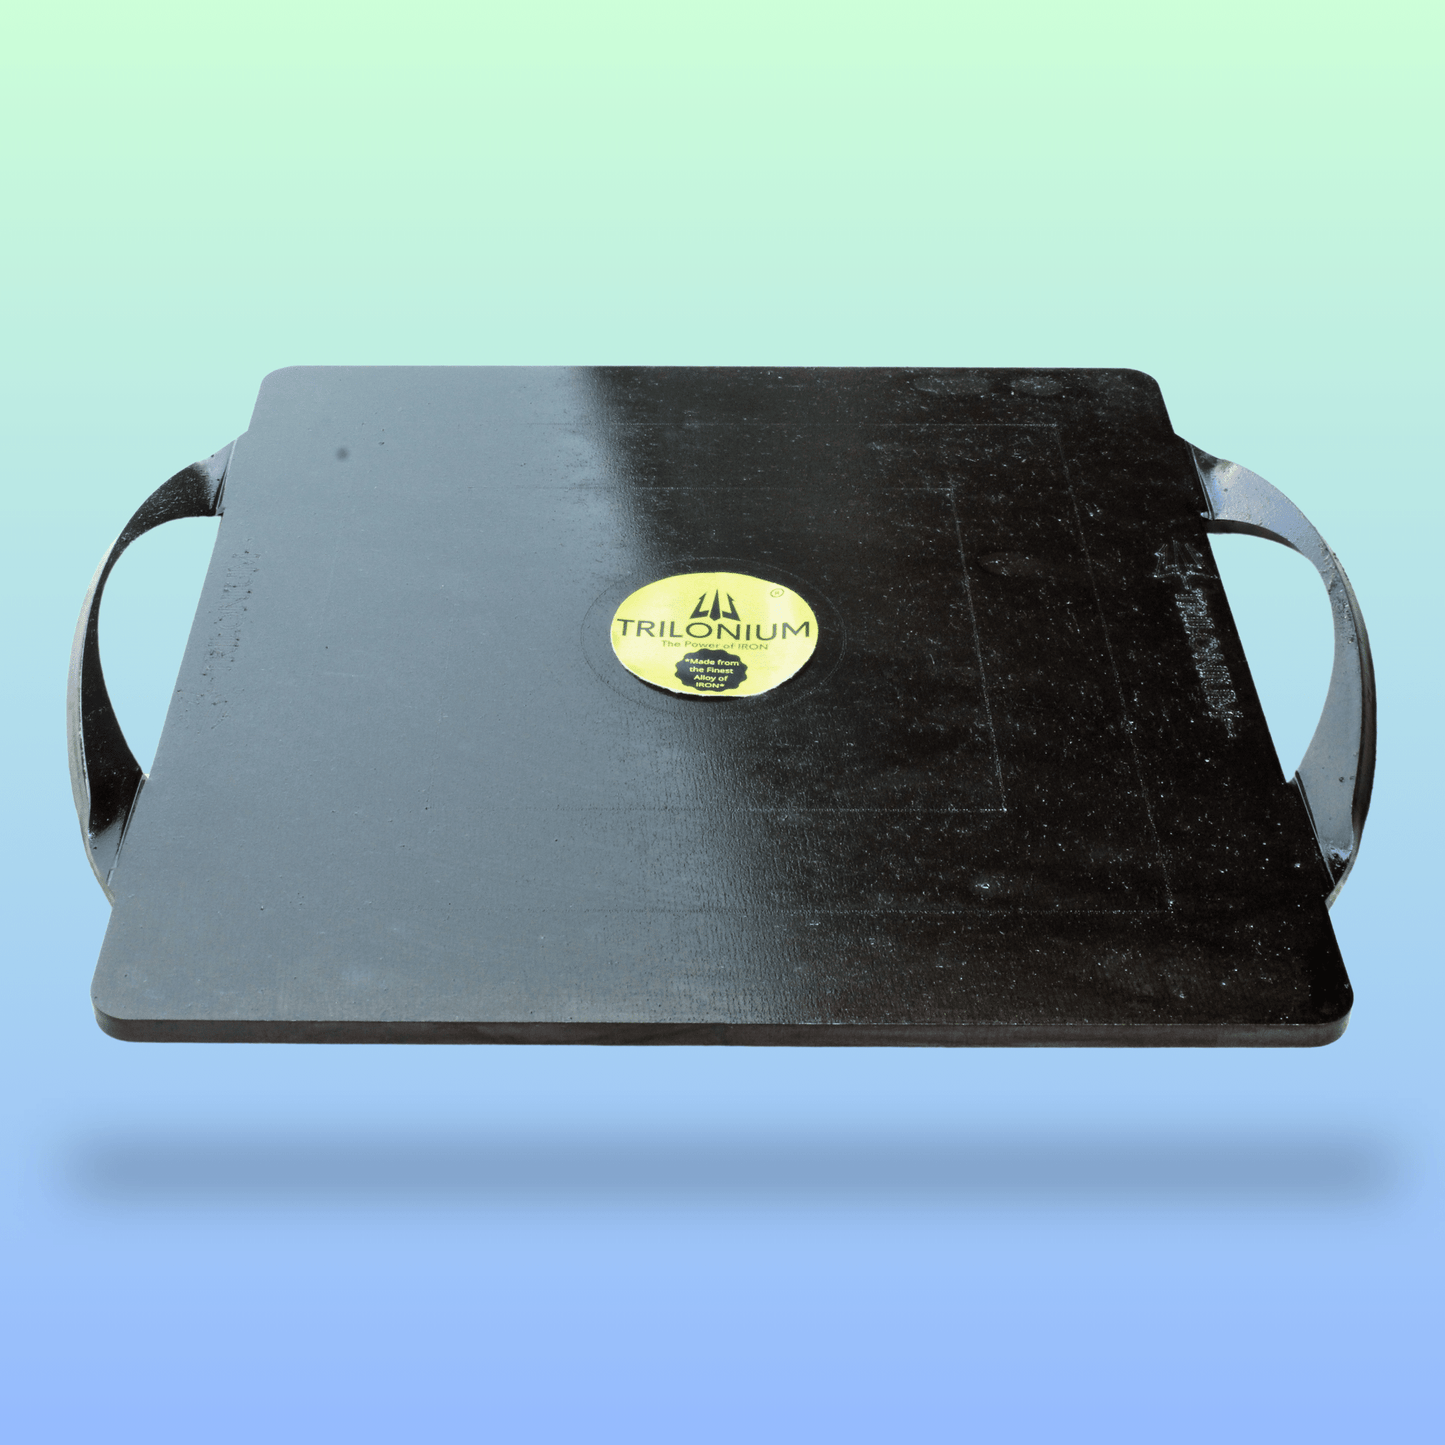 Trilonium Pre-Seasoned Iron Boulder Square Griddle pathri Tawa 30 x 30 cms , Ultra Smooth, Weights 5.8 Kgs